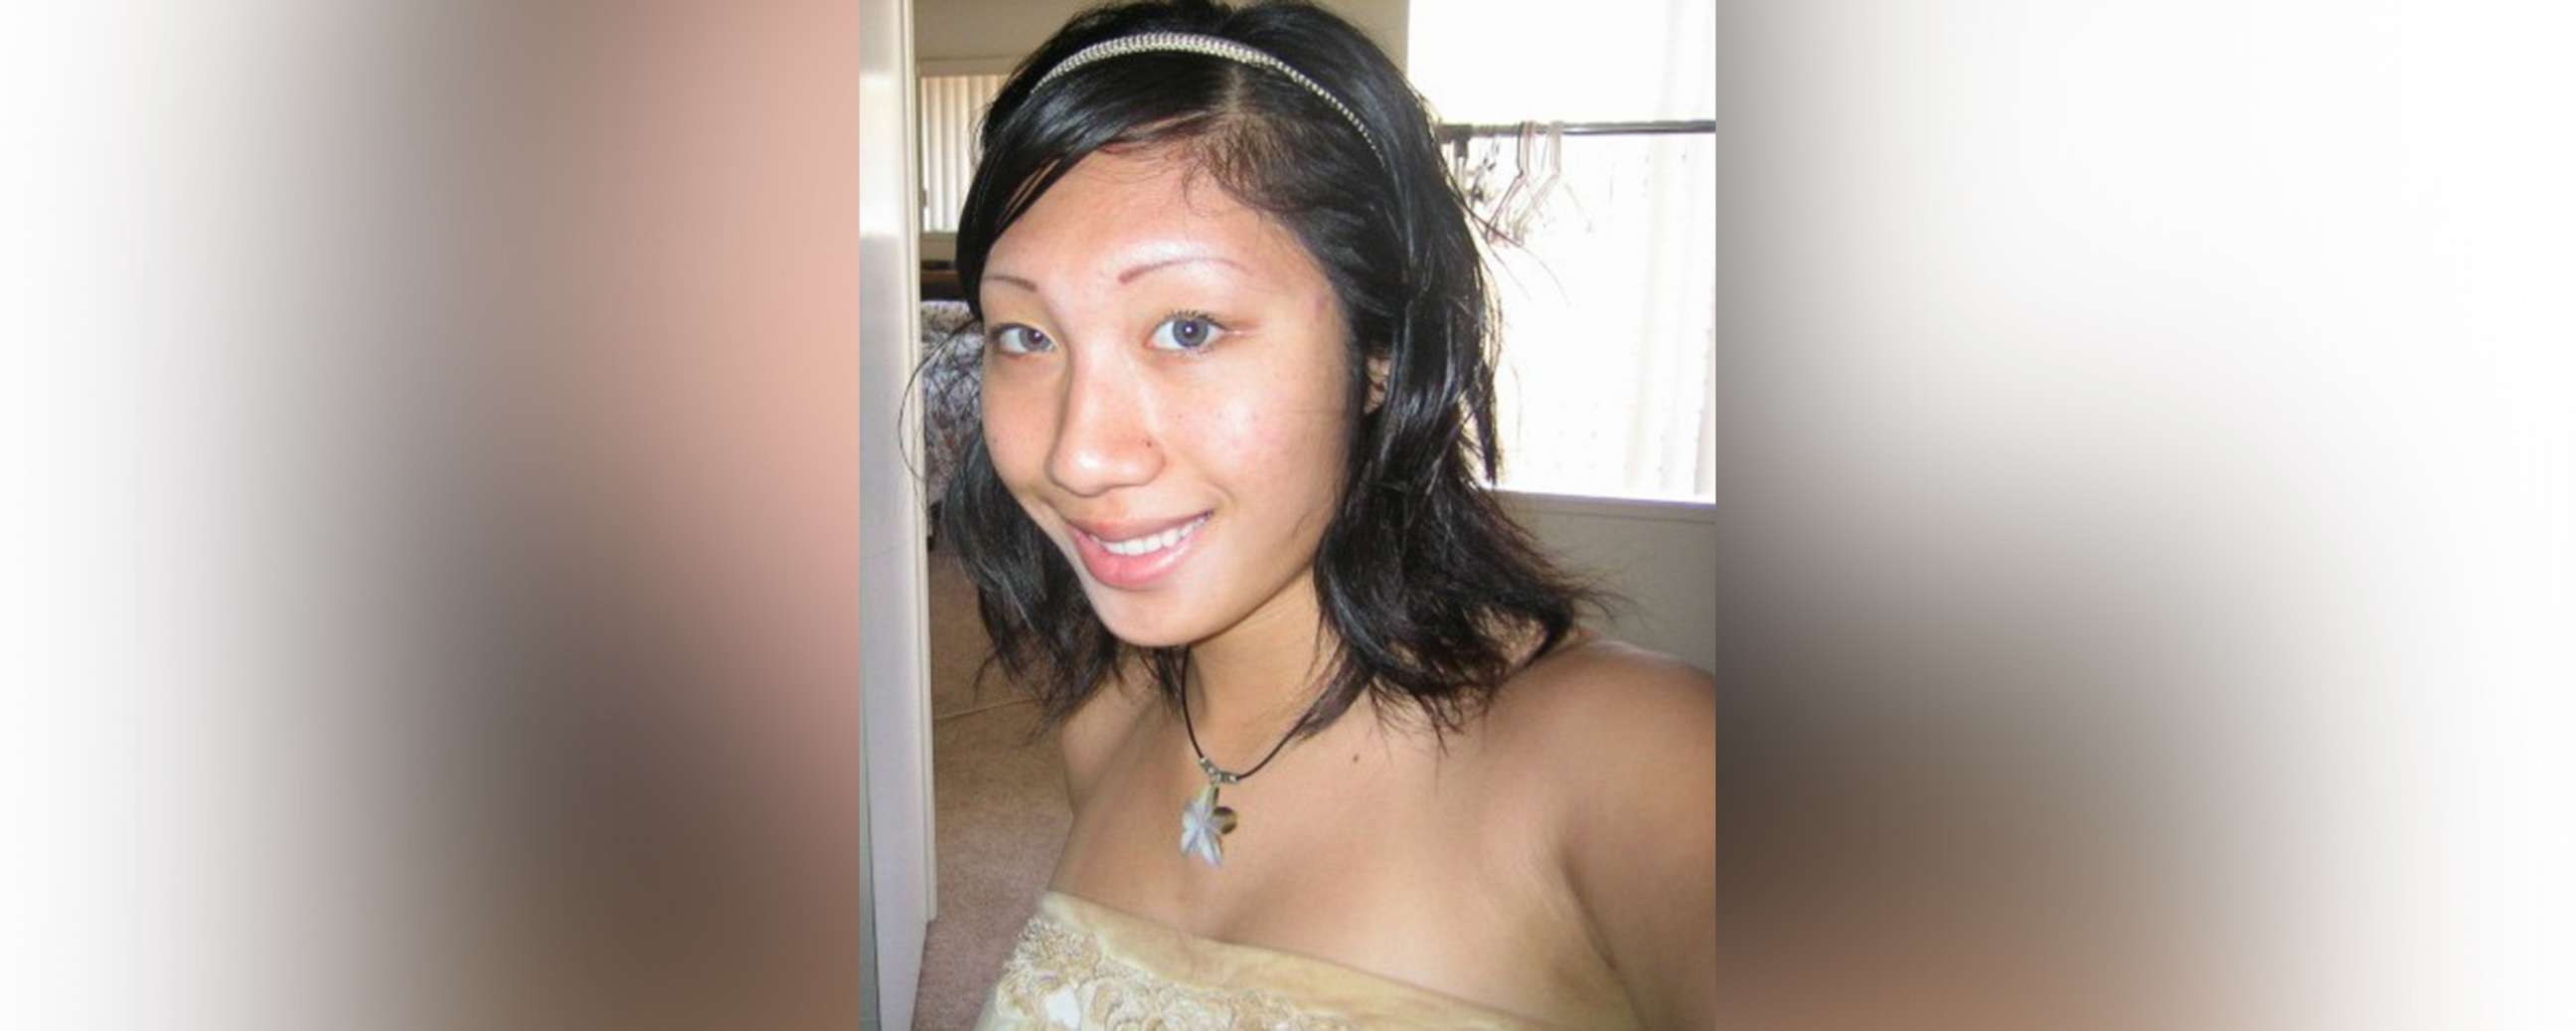 PHOTO: Sam Herr's friend Julie Kibuishi was a 23-year-old dancer and college student at the Orange County School of the Arts.